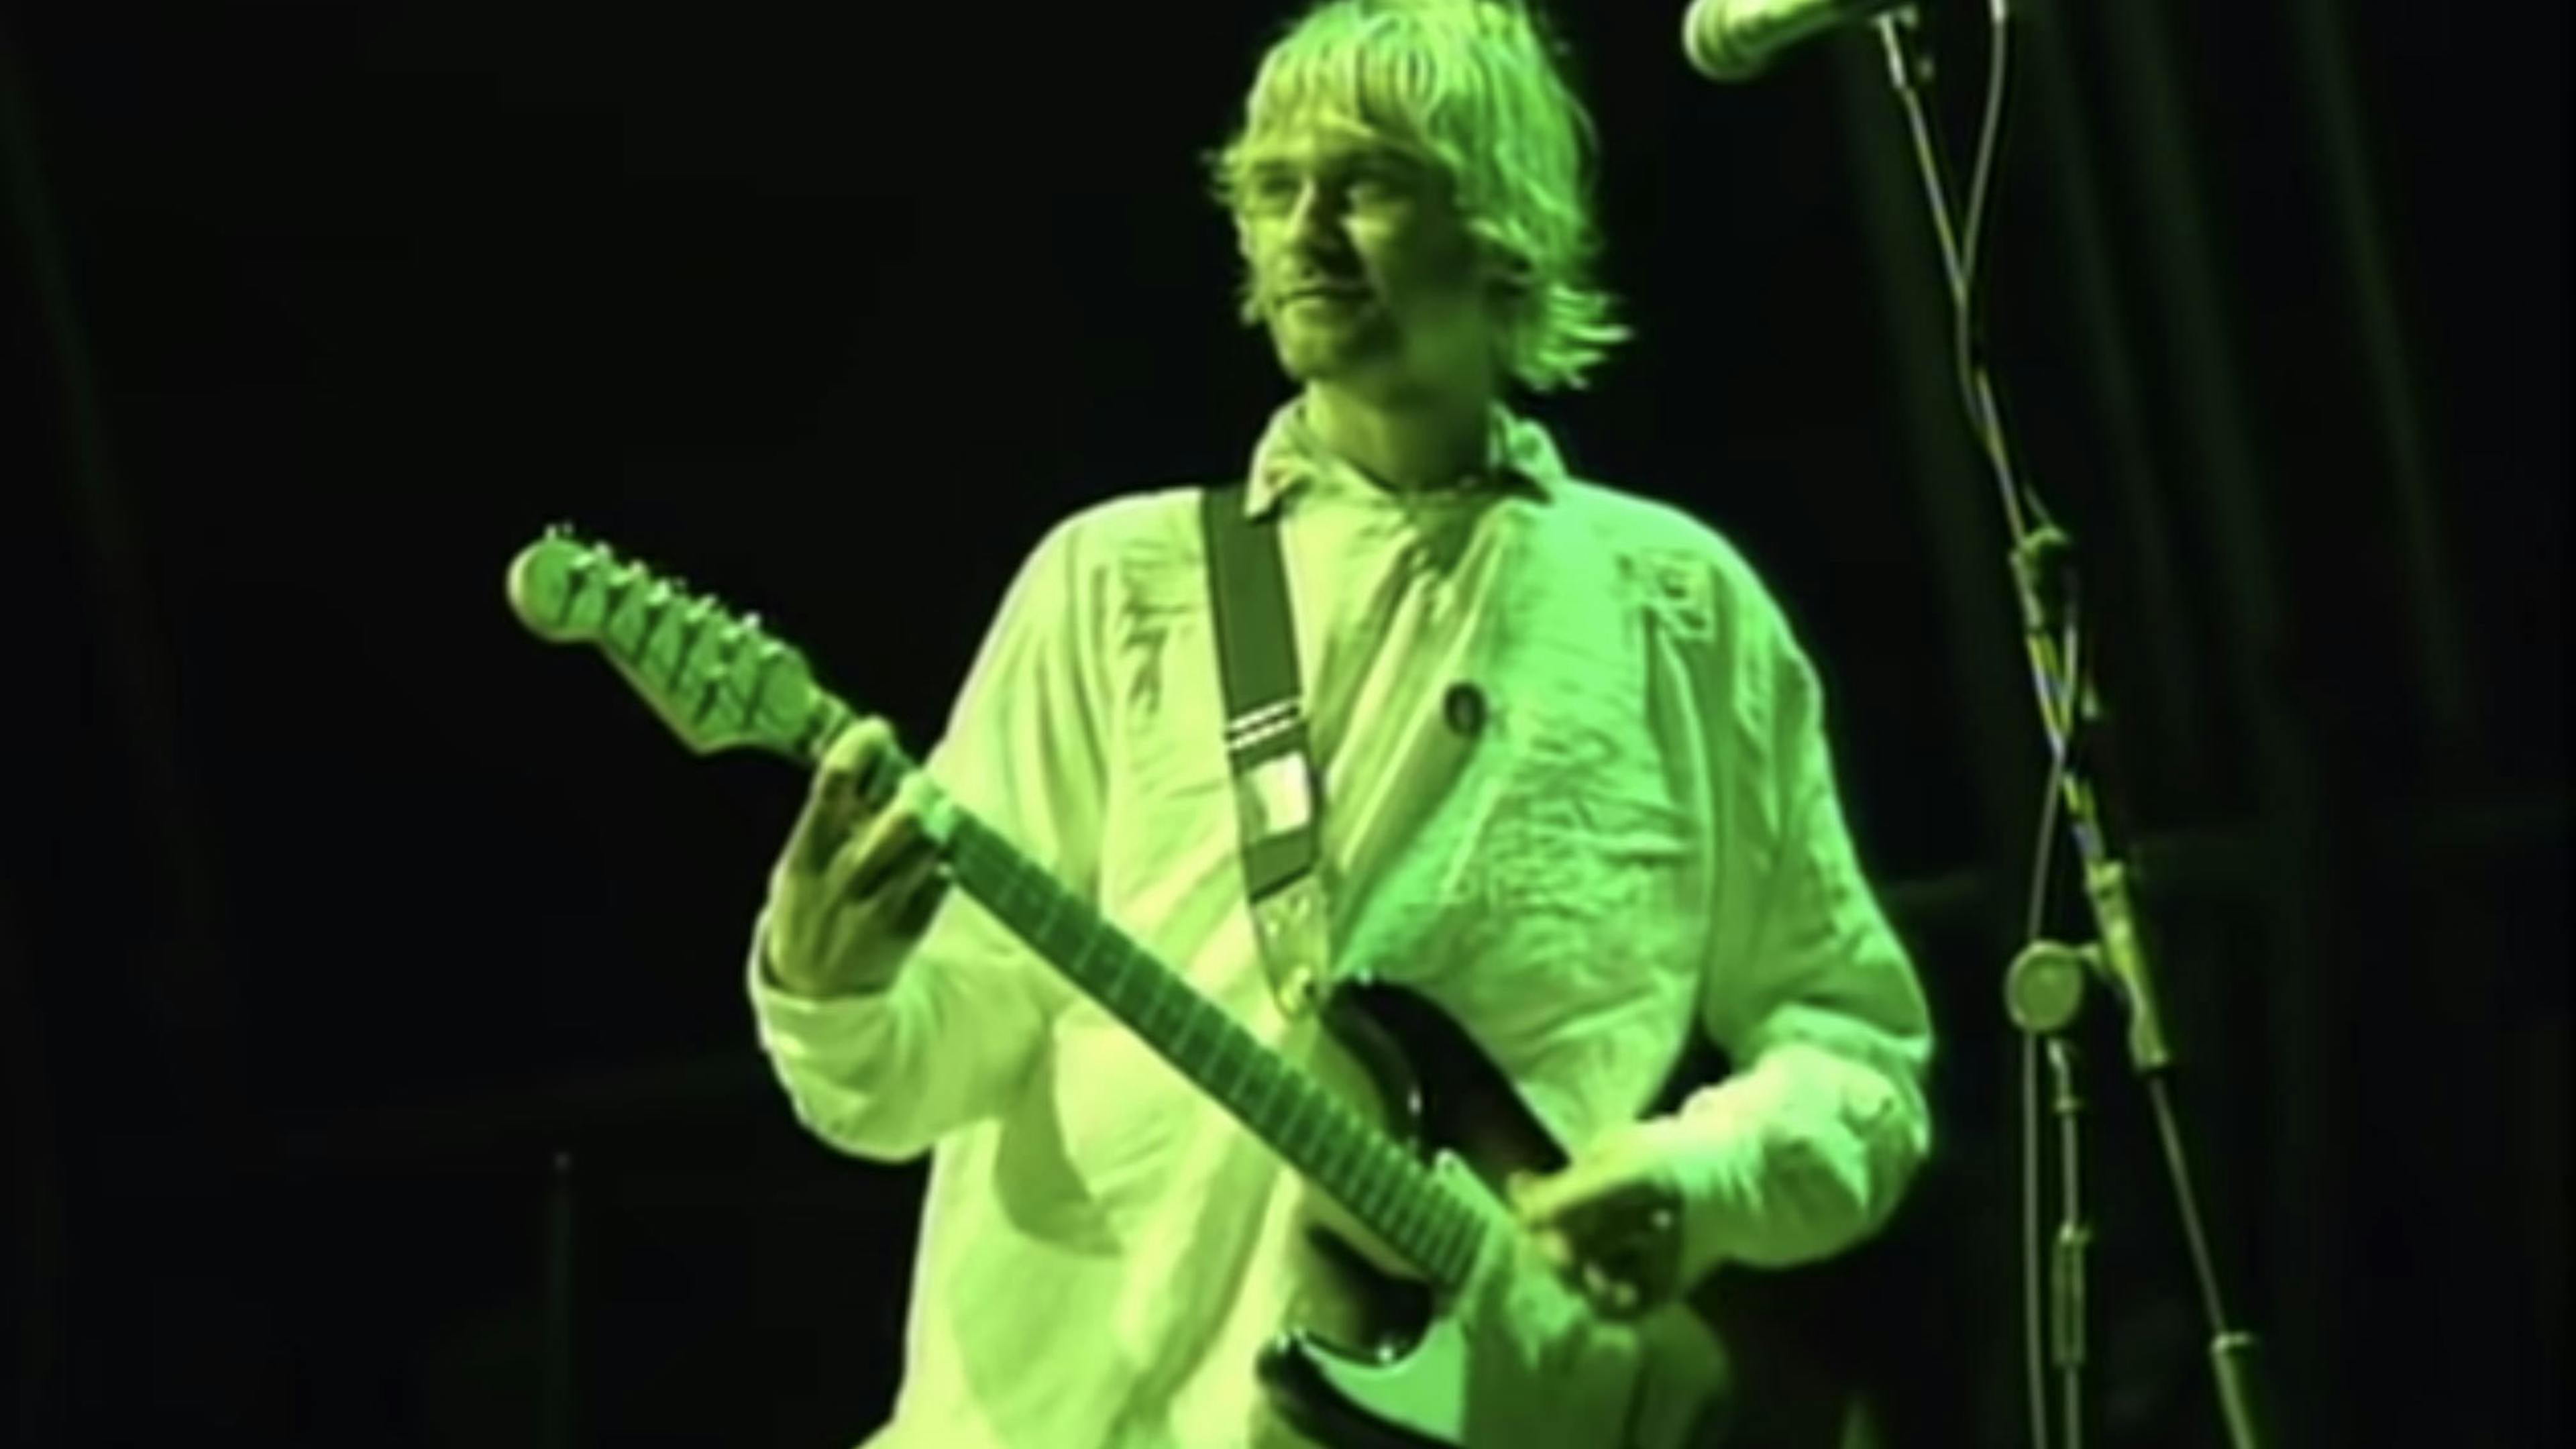 Kurt Cobain's Reading Festival Hospital Gown Is Up For Auction